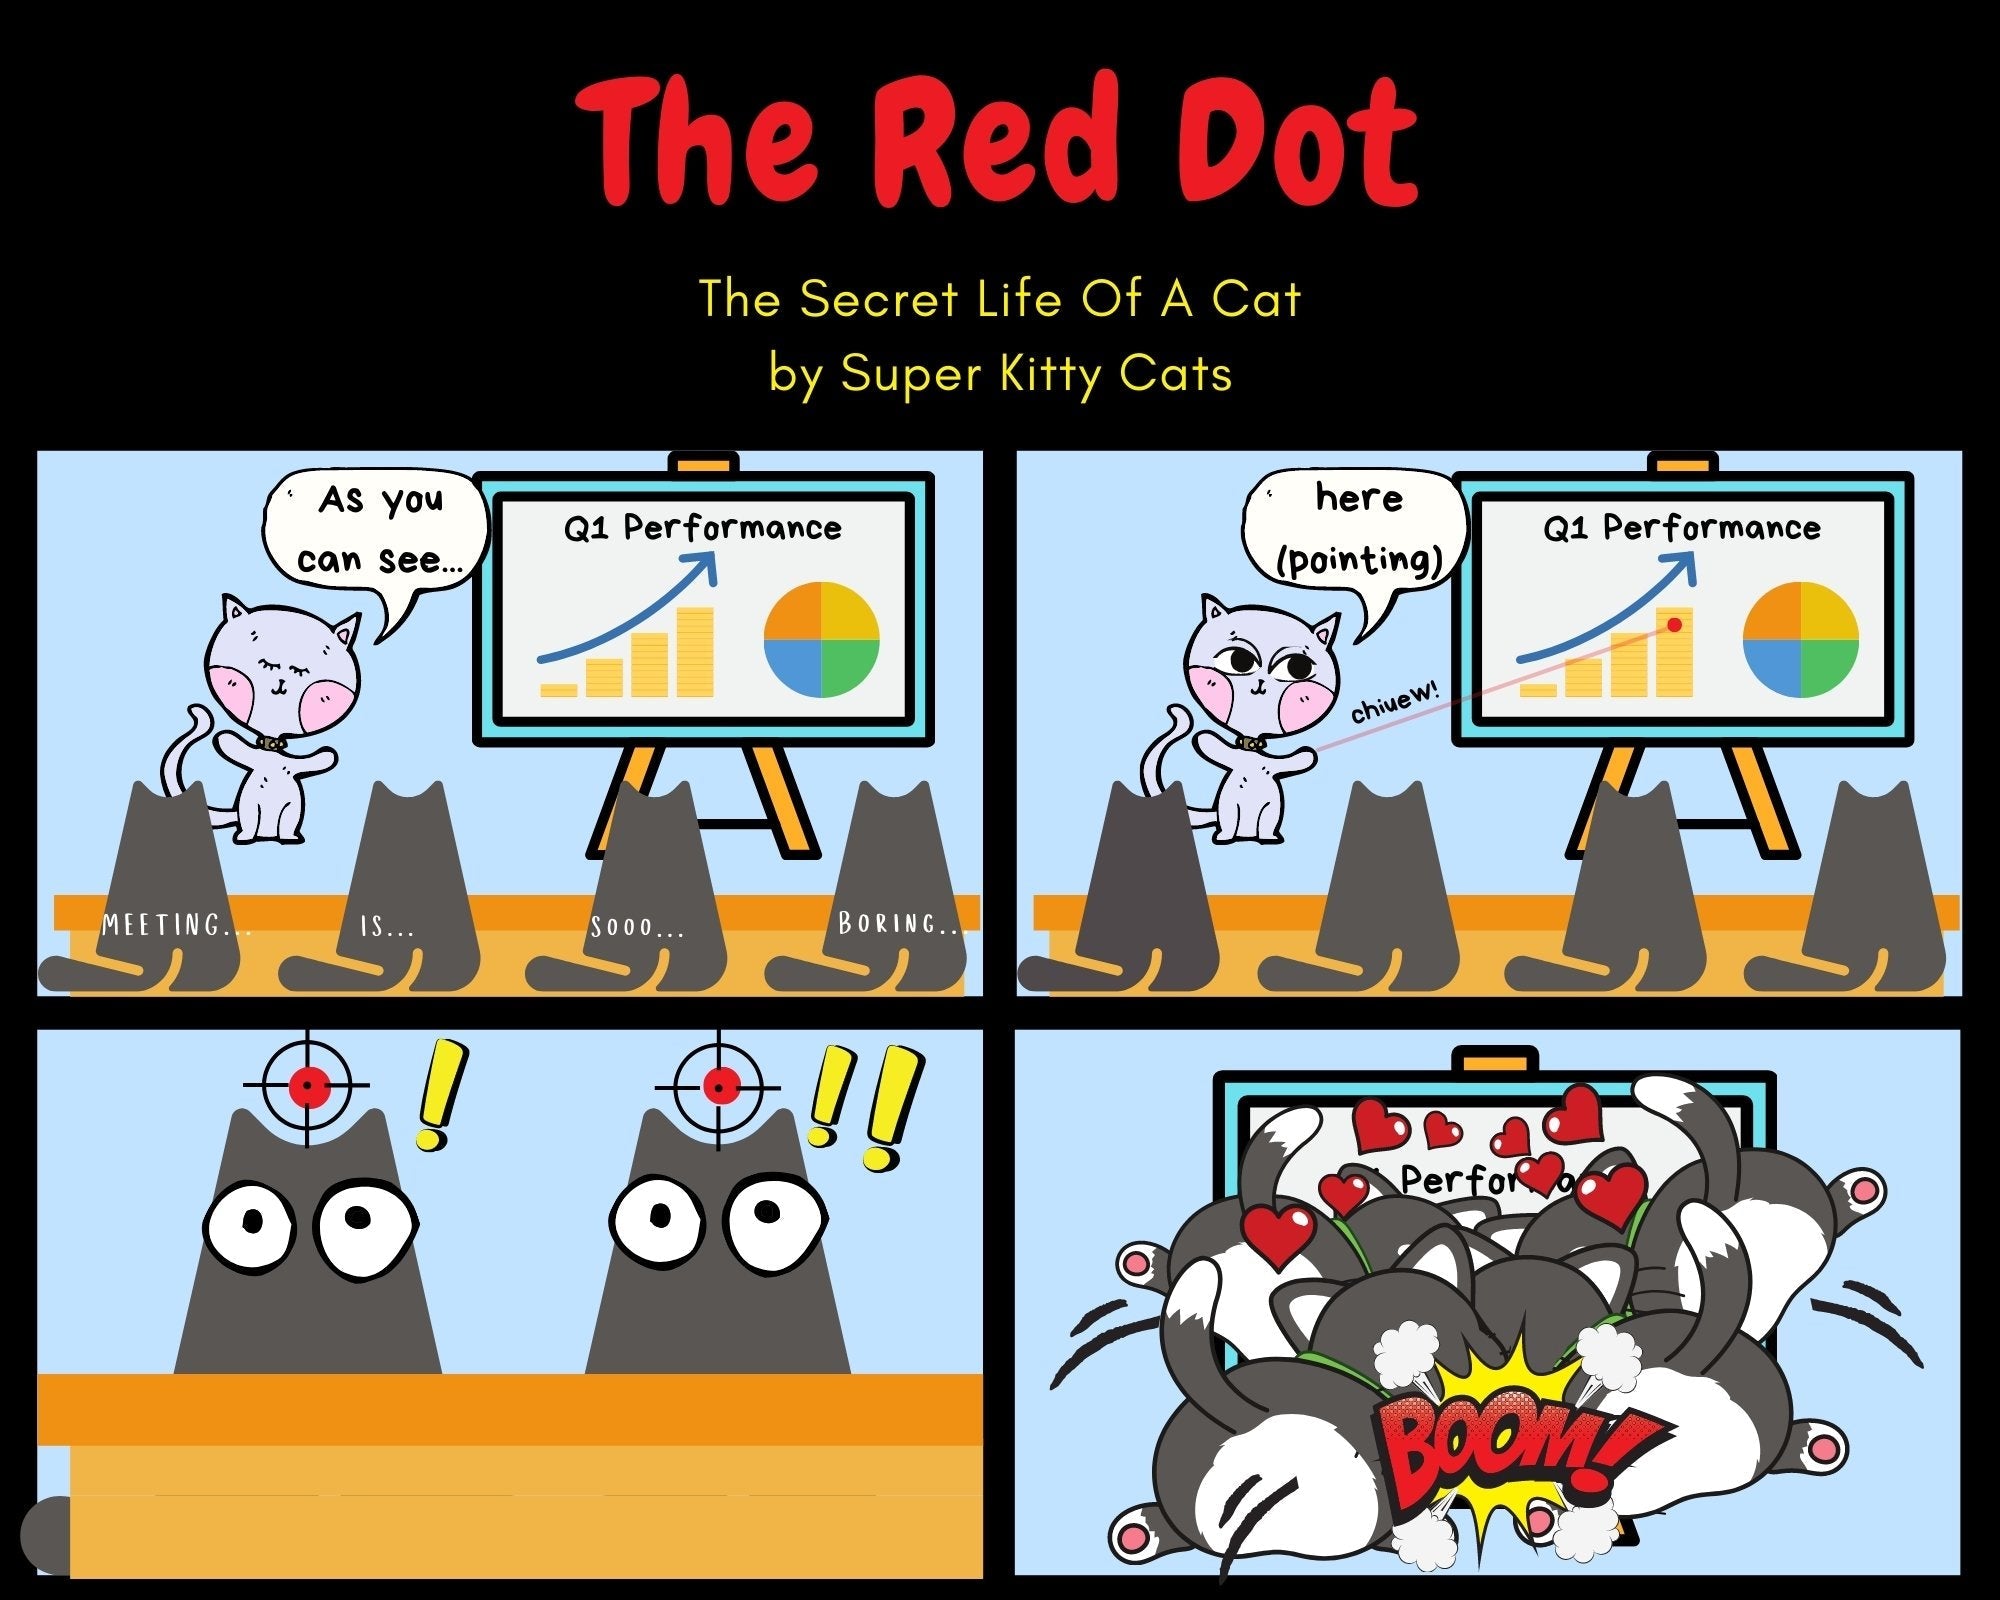 The Red Dot - Super Kitty Cats